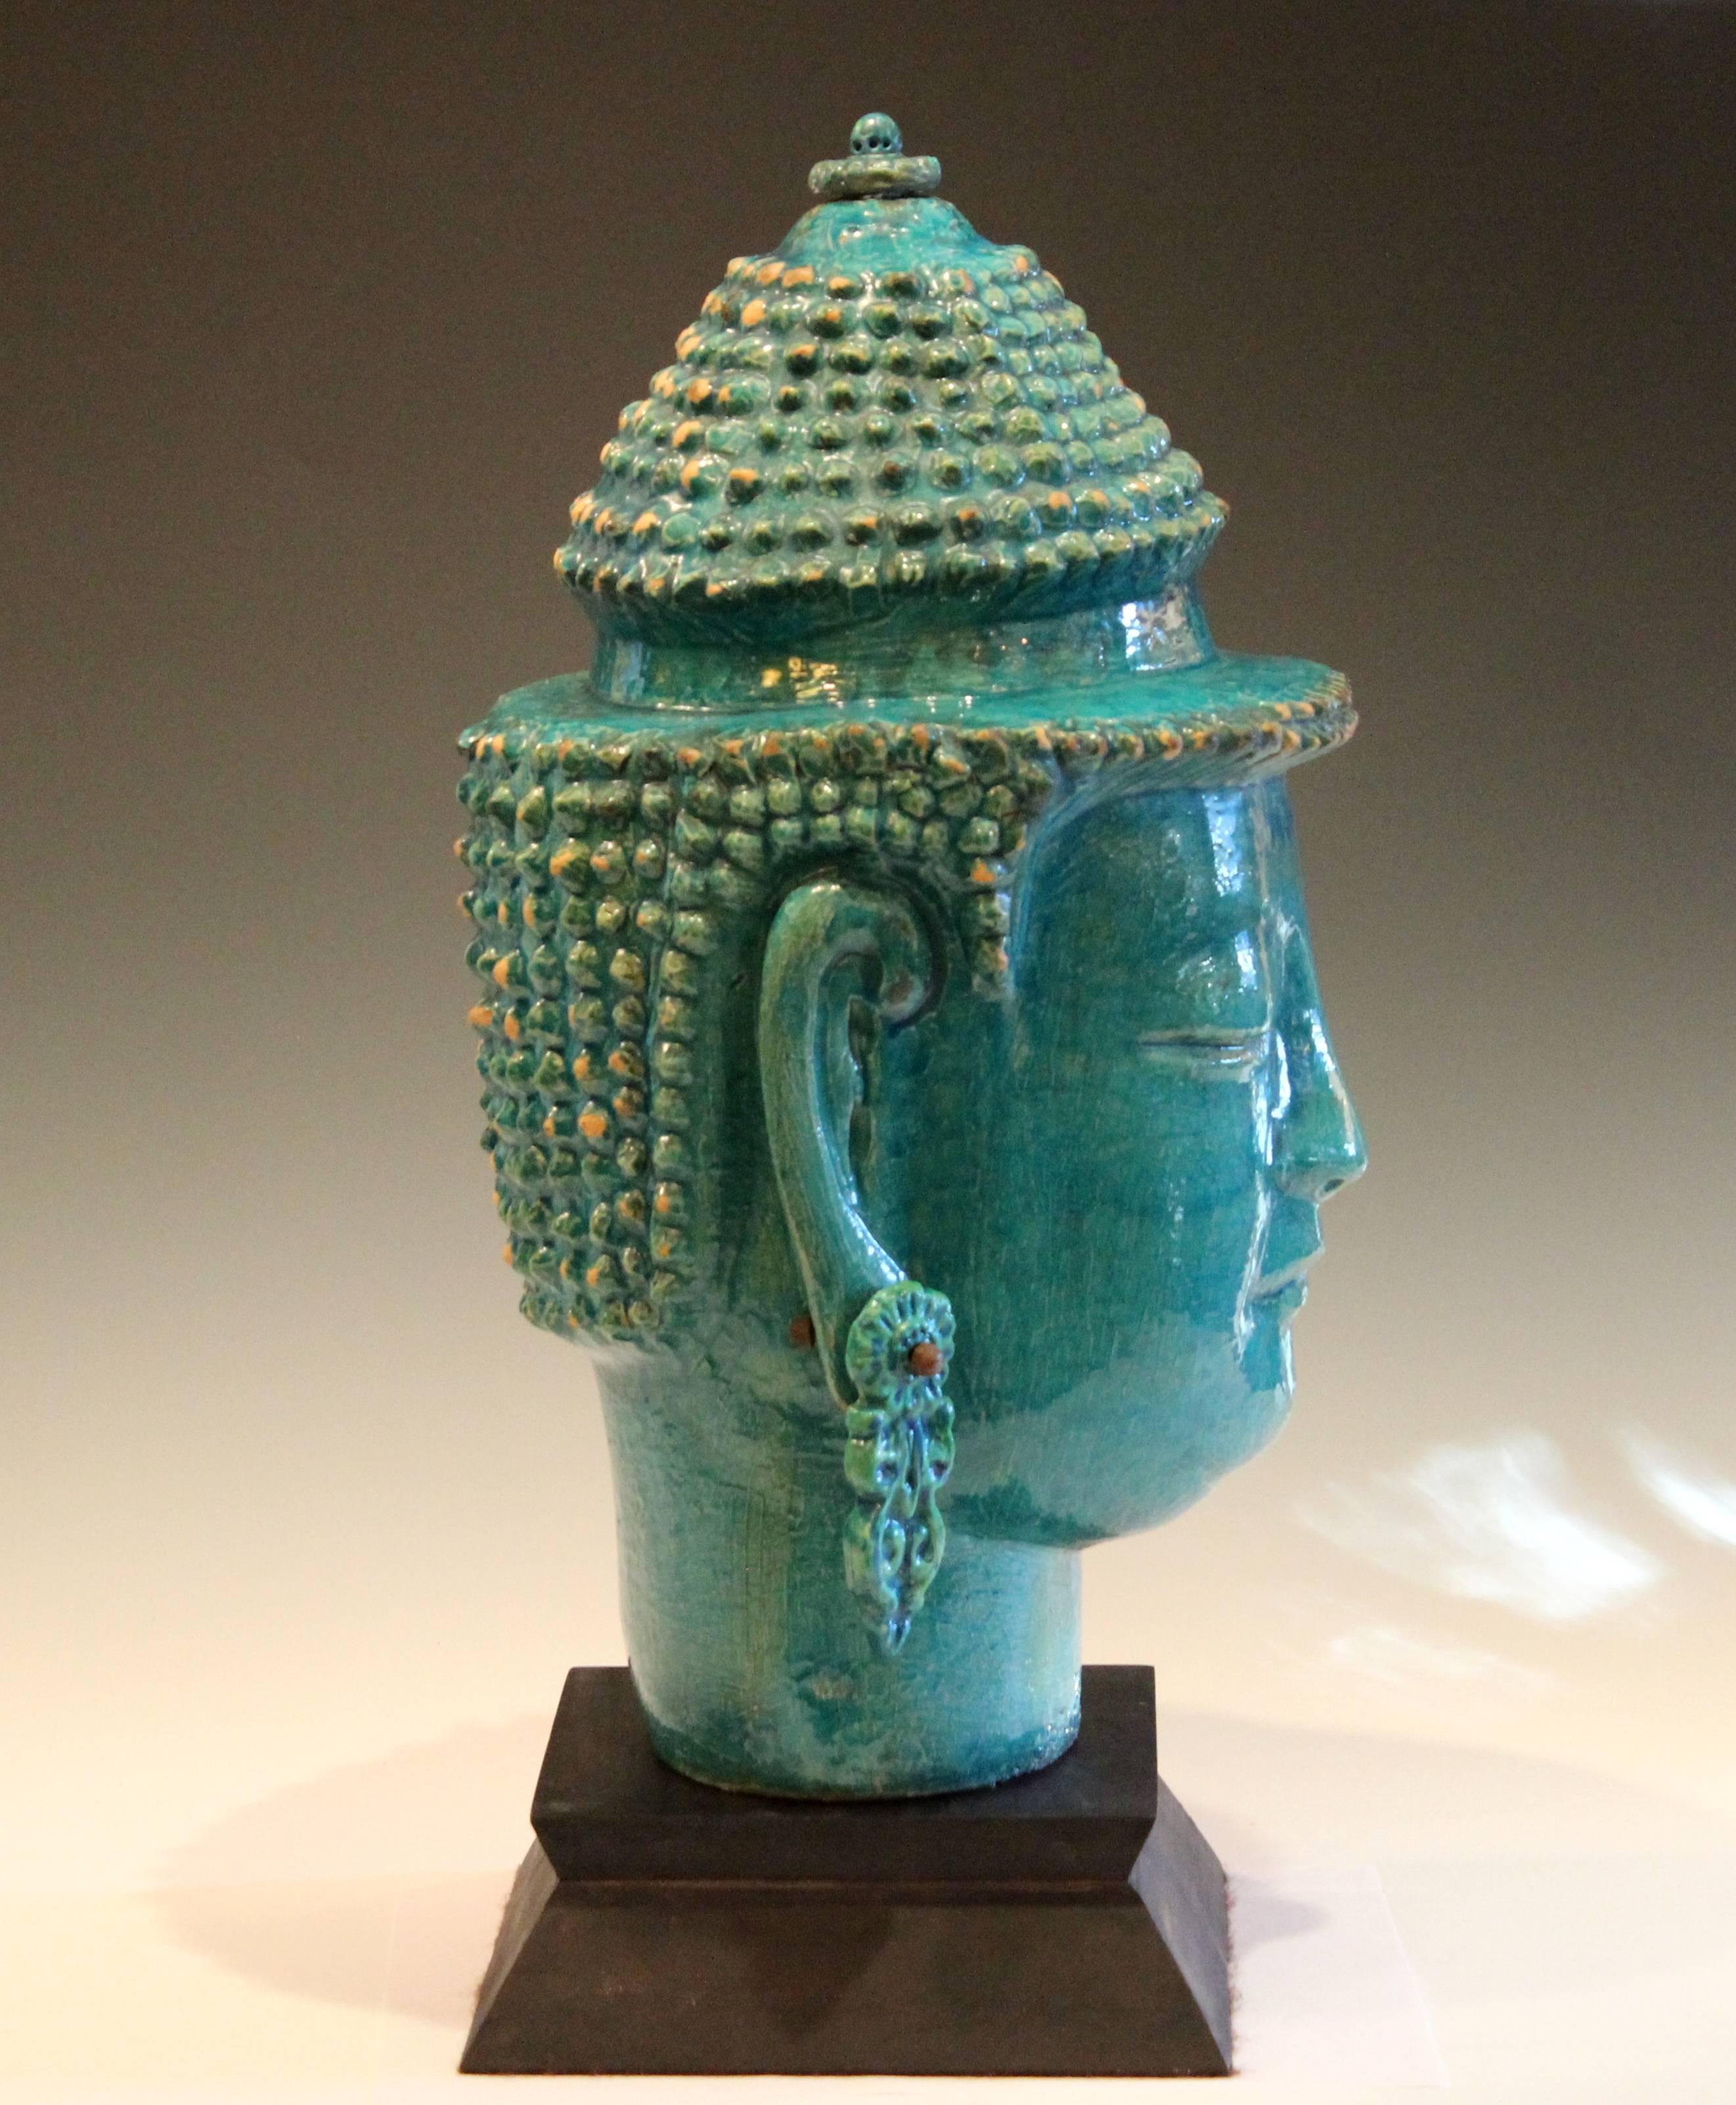 Huge vintage Italian pottery Buddha head on stand, circa 1960s, attributed to the Zaccagnini pottery of Florence. With large dangling earrings and turquoise and green crackle glaze. Measure: 20 1/4" high, approximate 9 1/2" diameter.